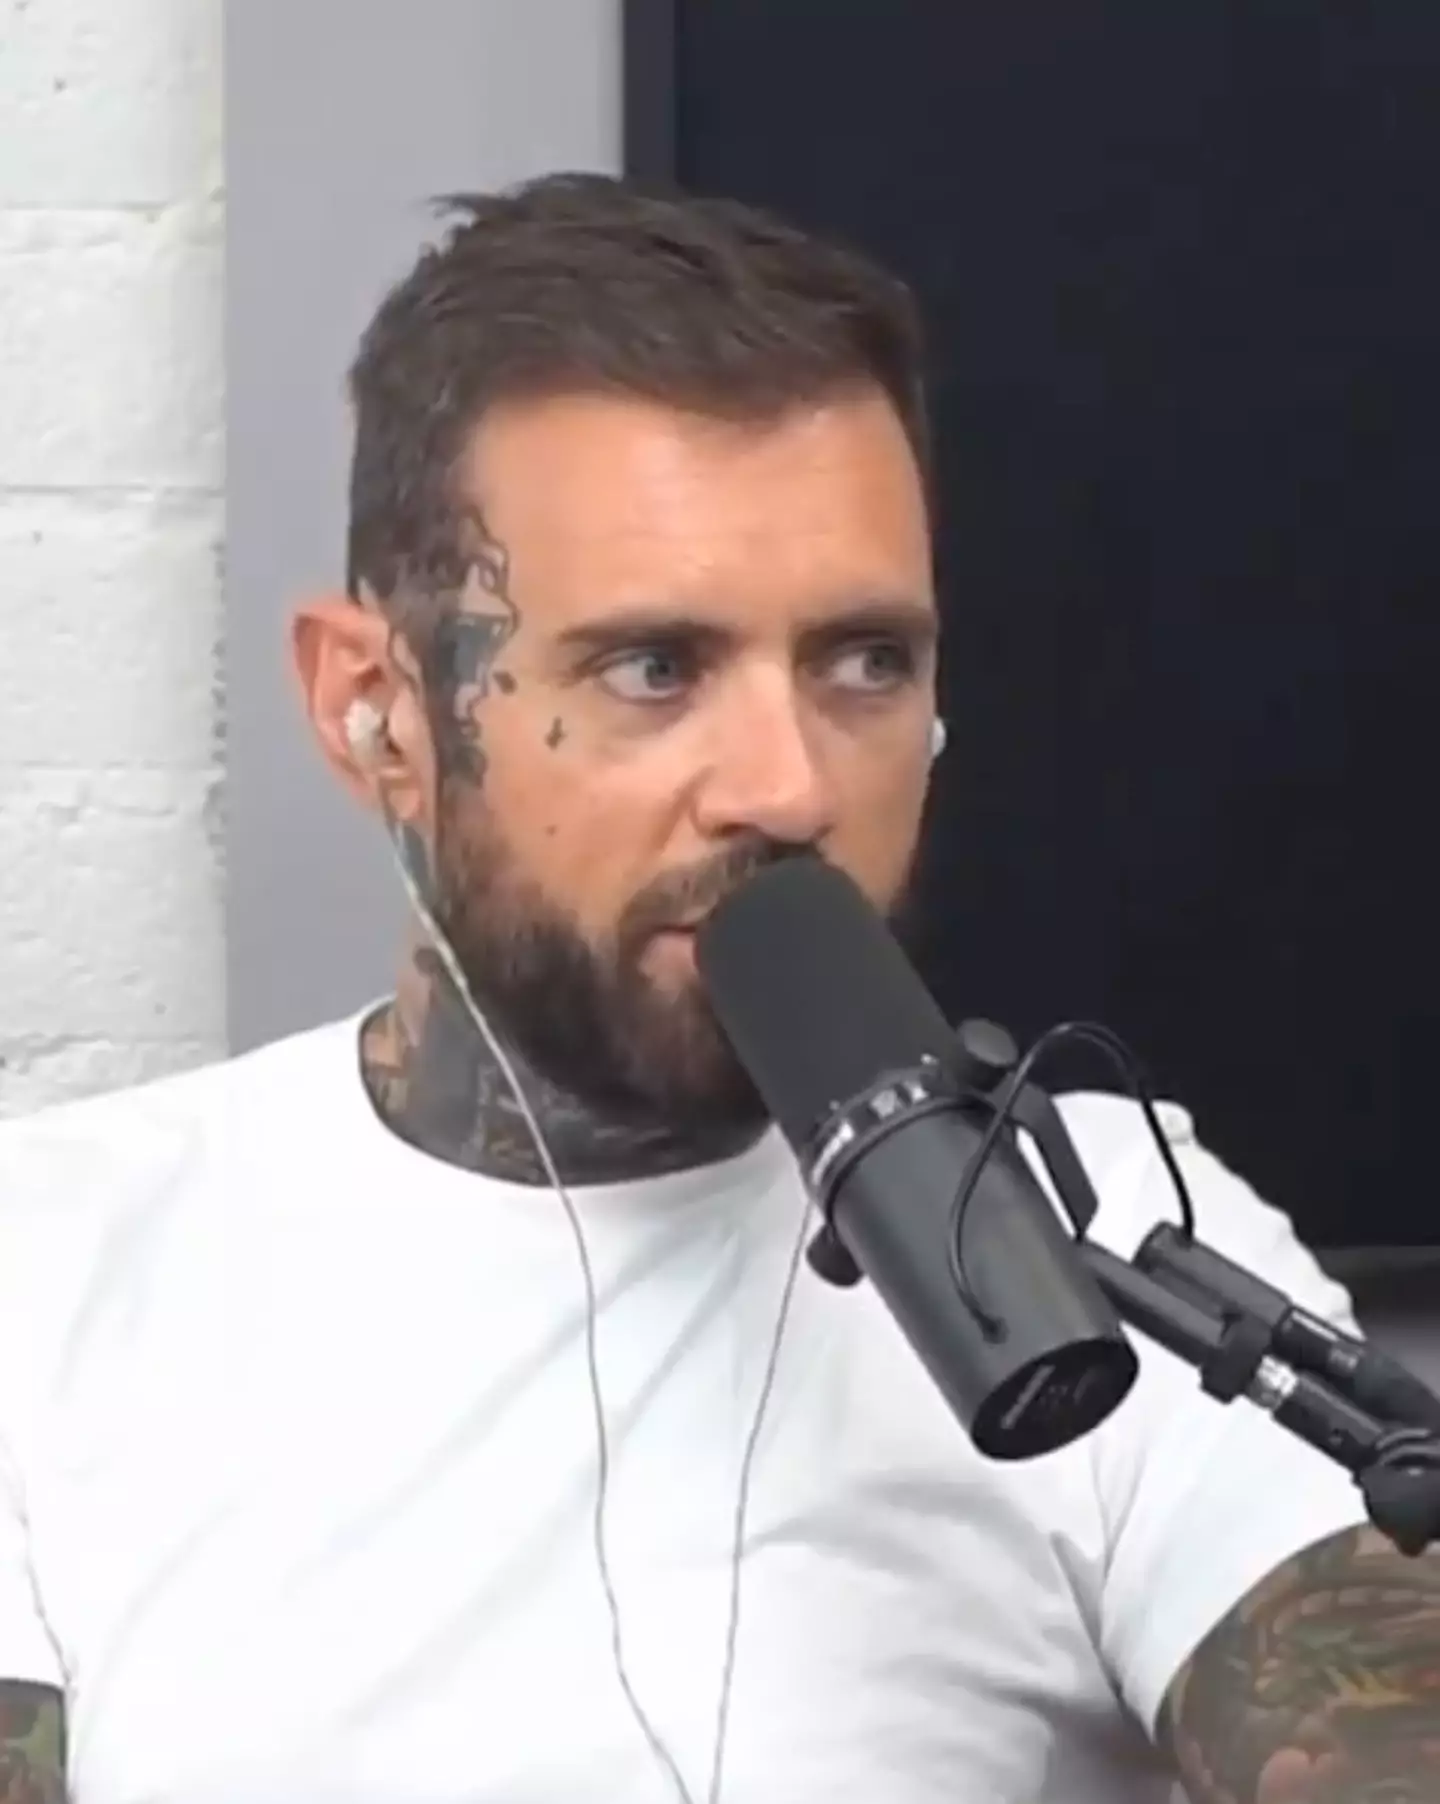 Adam22 and Lena have spoken about the impact on their sex life.